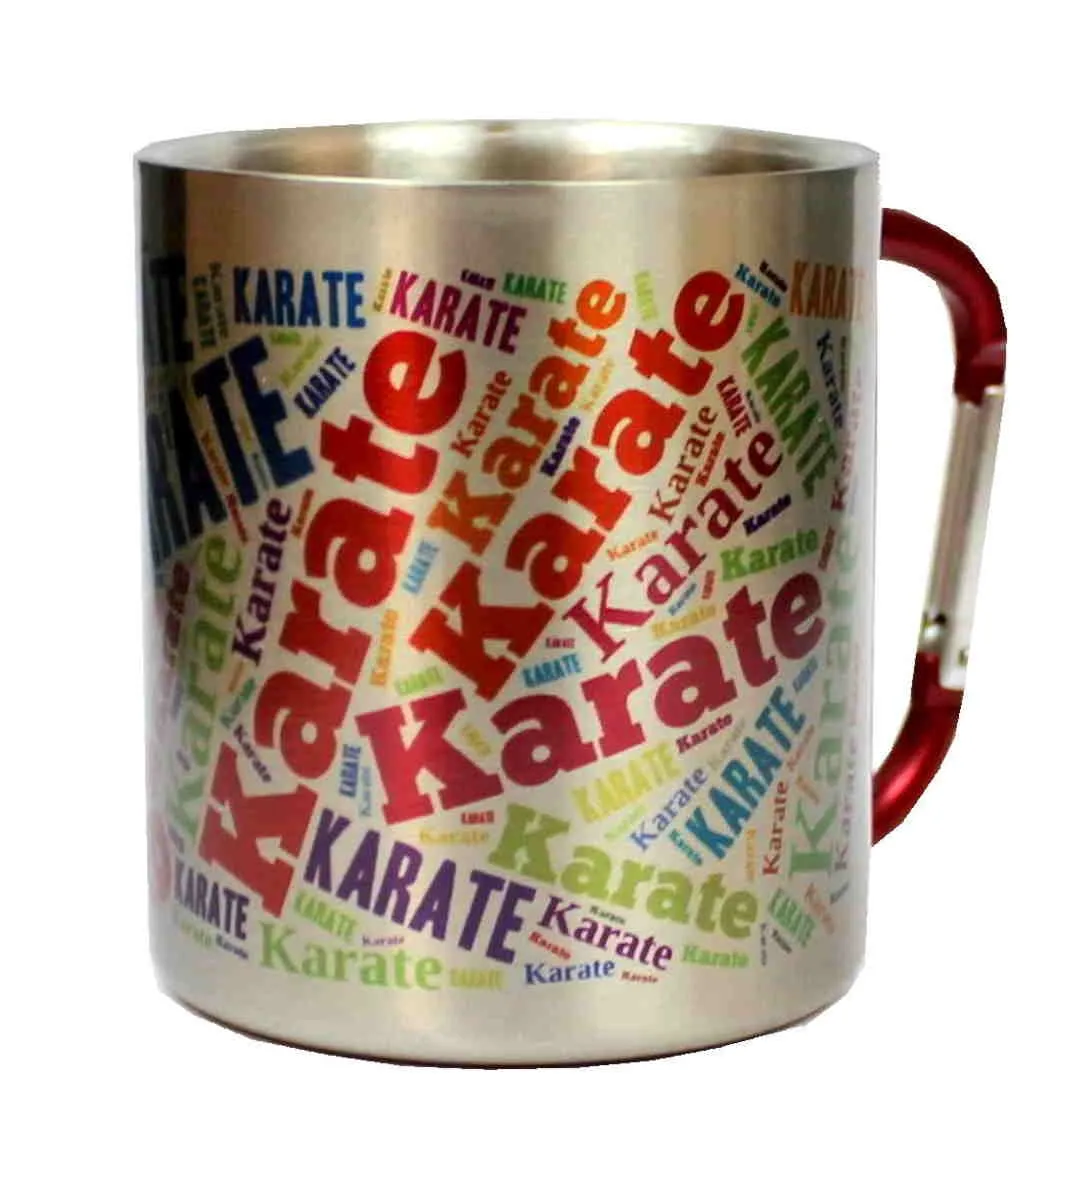 Stainless steel mug with text Karate